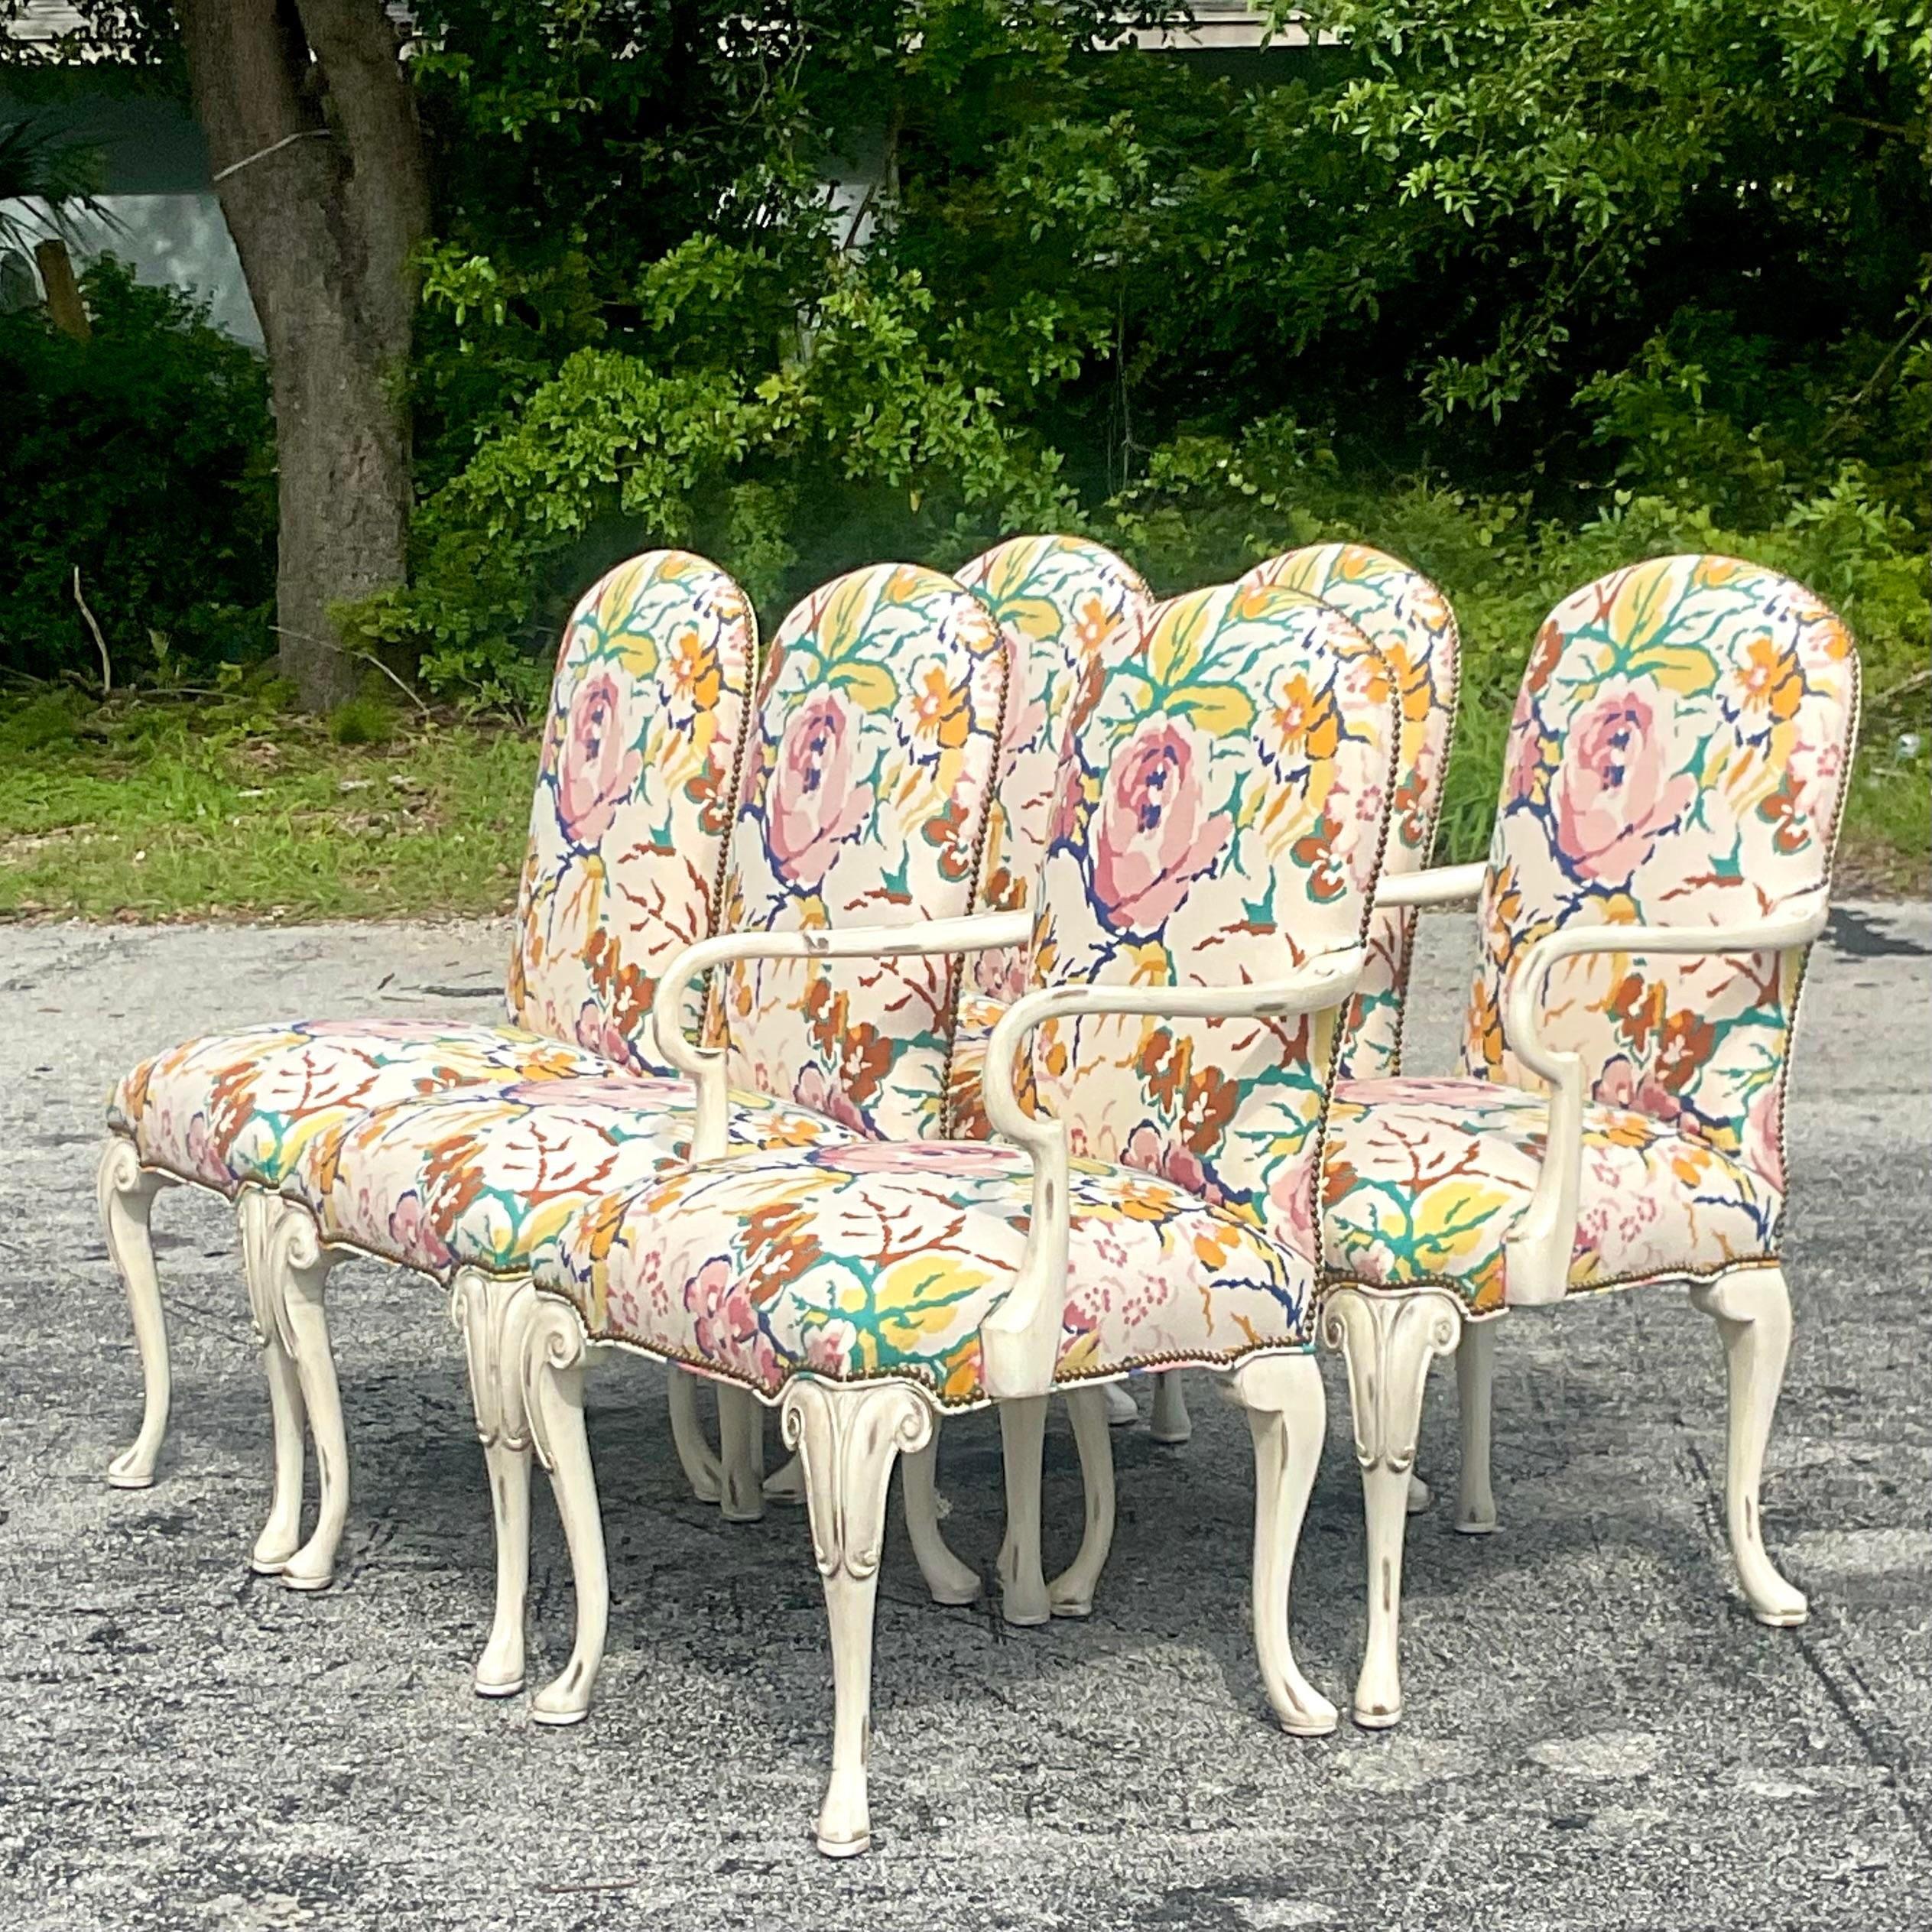 A stunning set of six vintage Regency dining chairs. Made by the iconic Councill group and marked on the bottom. A beautiful floral fabric in bright clear colors. Coordinating Cabana stripe on the back. Acquired from a Palm Beach estate.

armchair